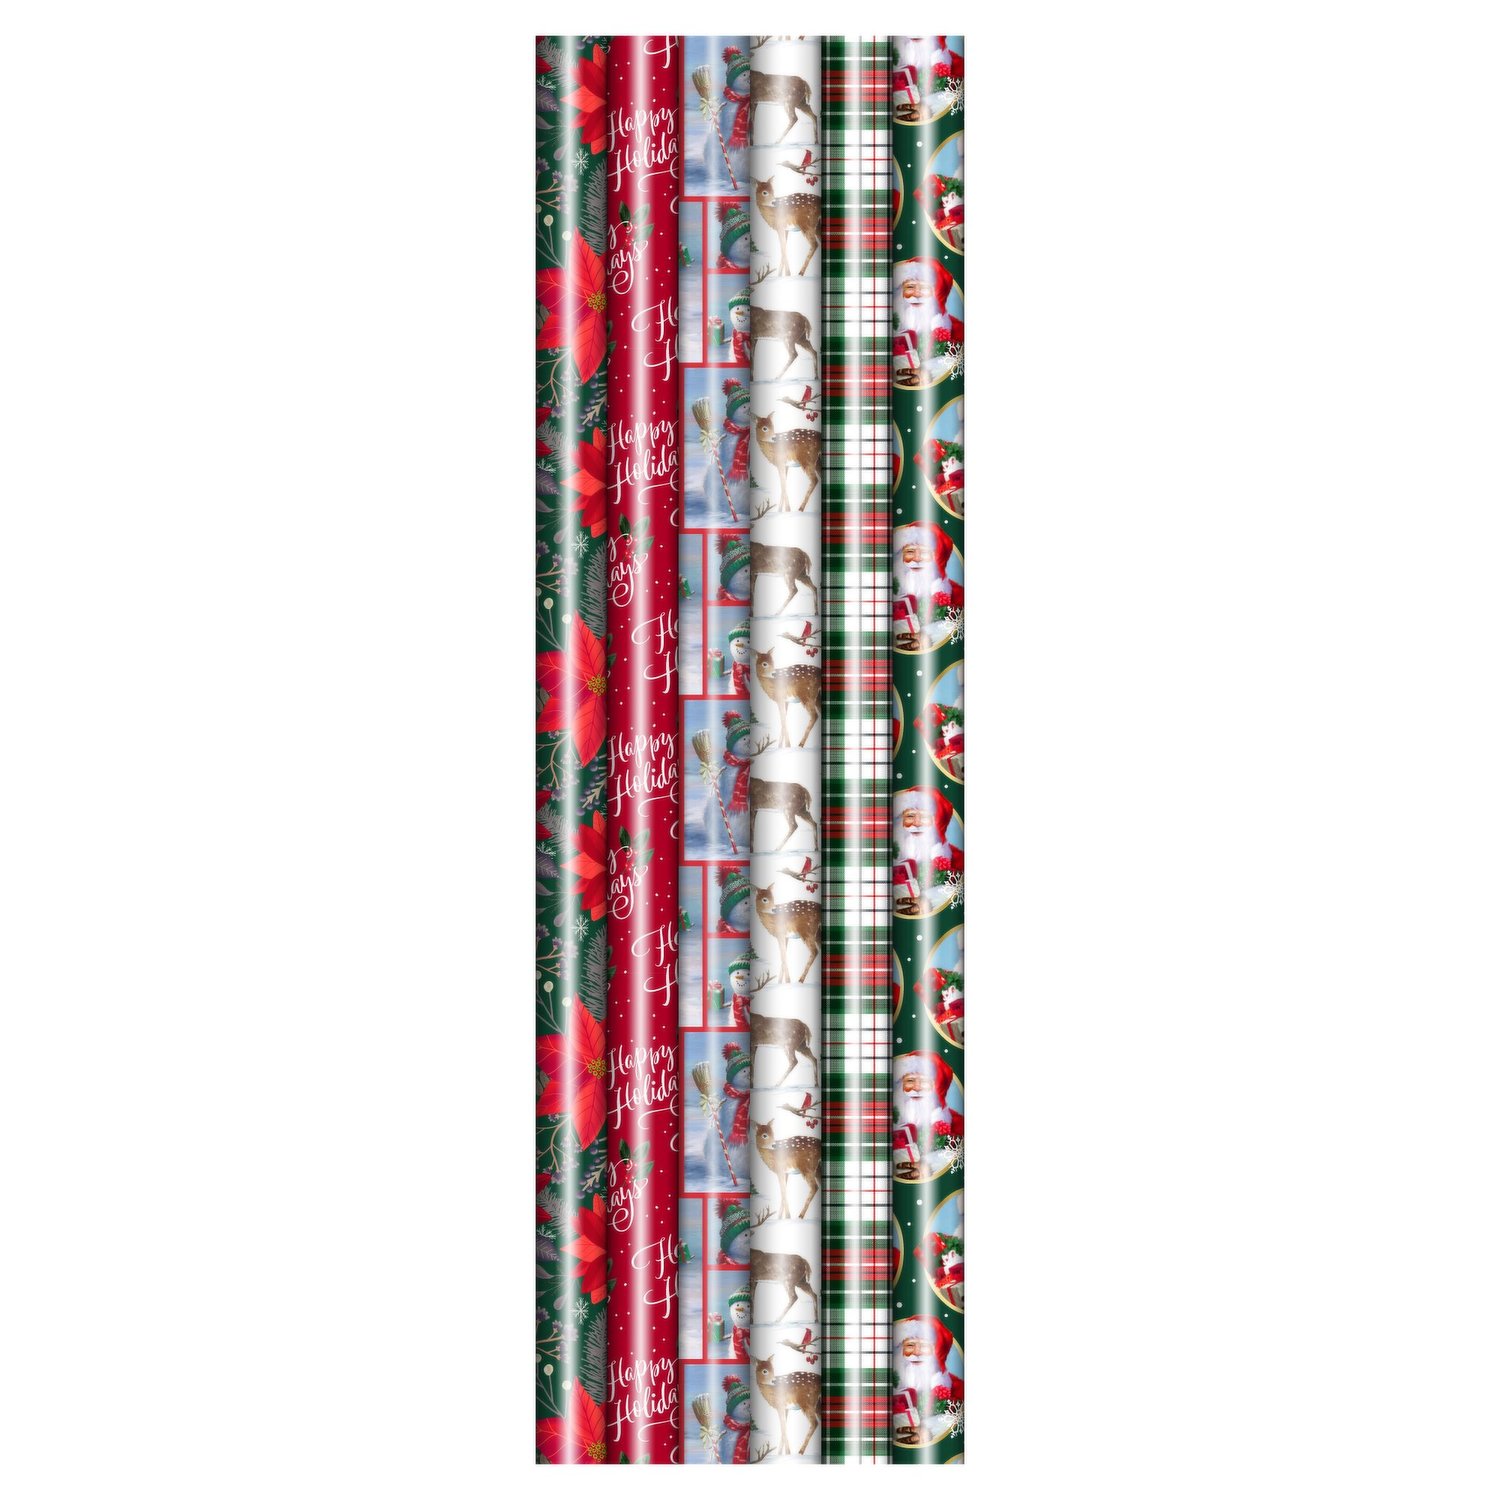 Black and White Prints 3-Pack Reversible Wrapping Paper, 75 sq. ft. total -  Wrapping Paper Sets - Hallmark